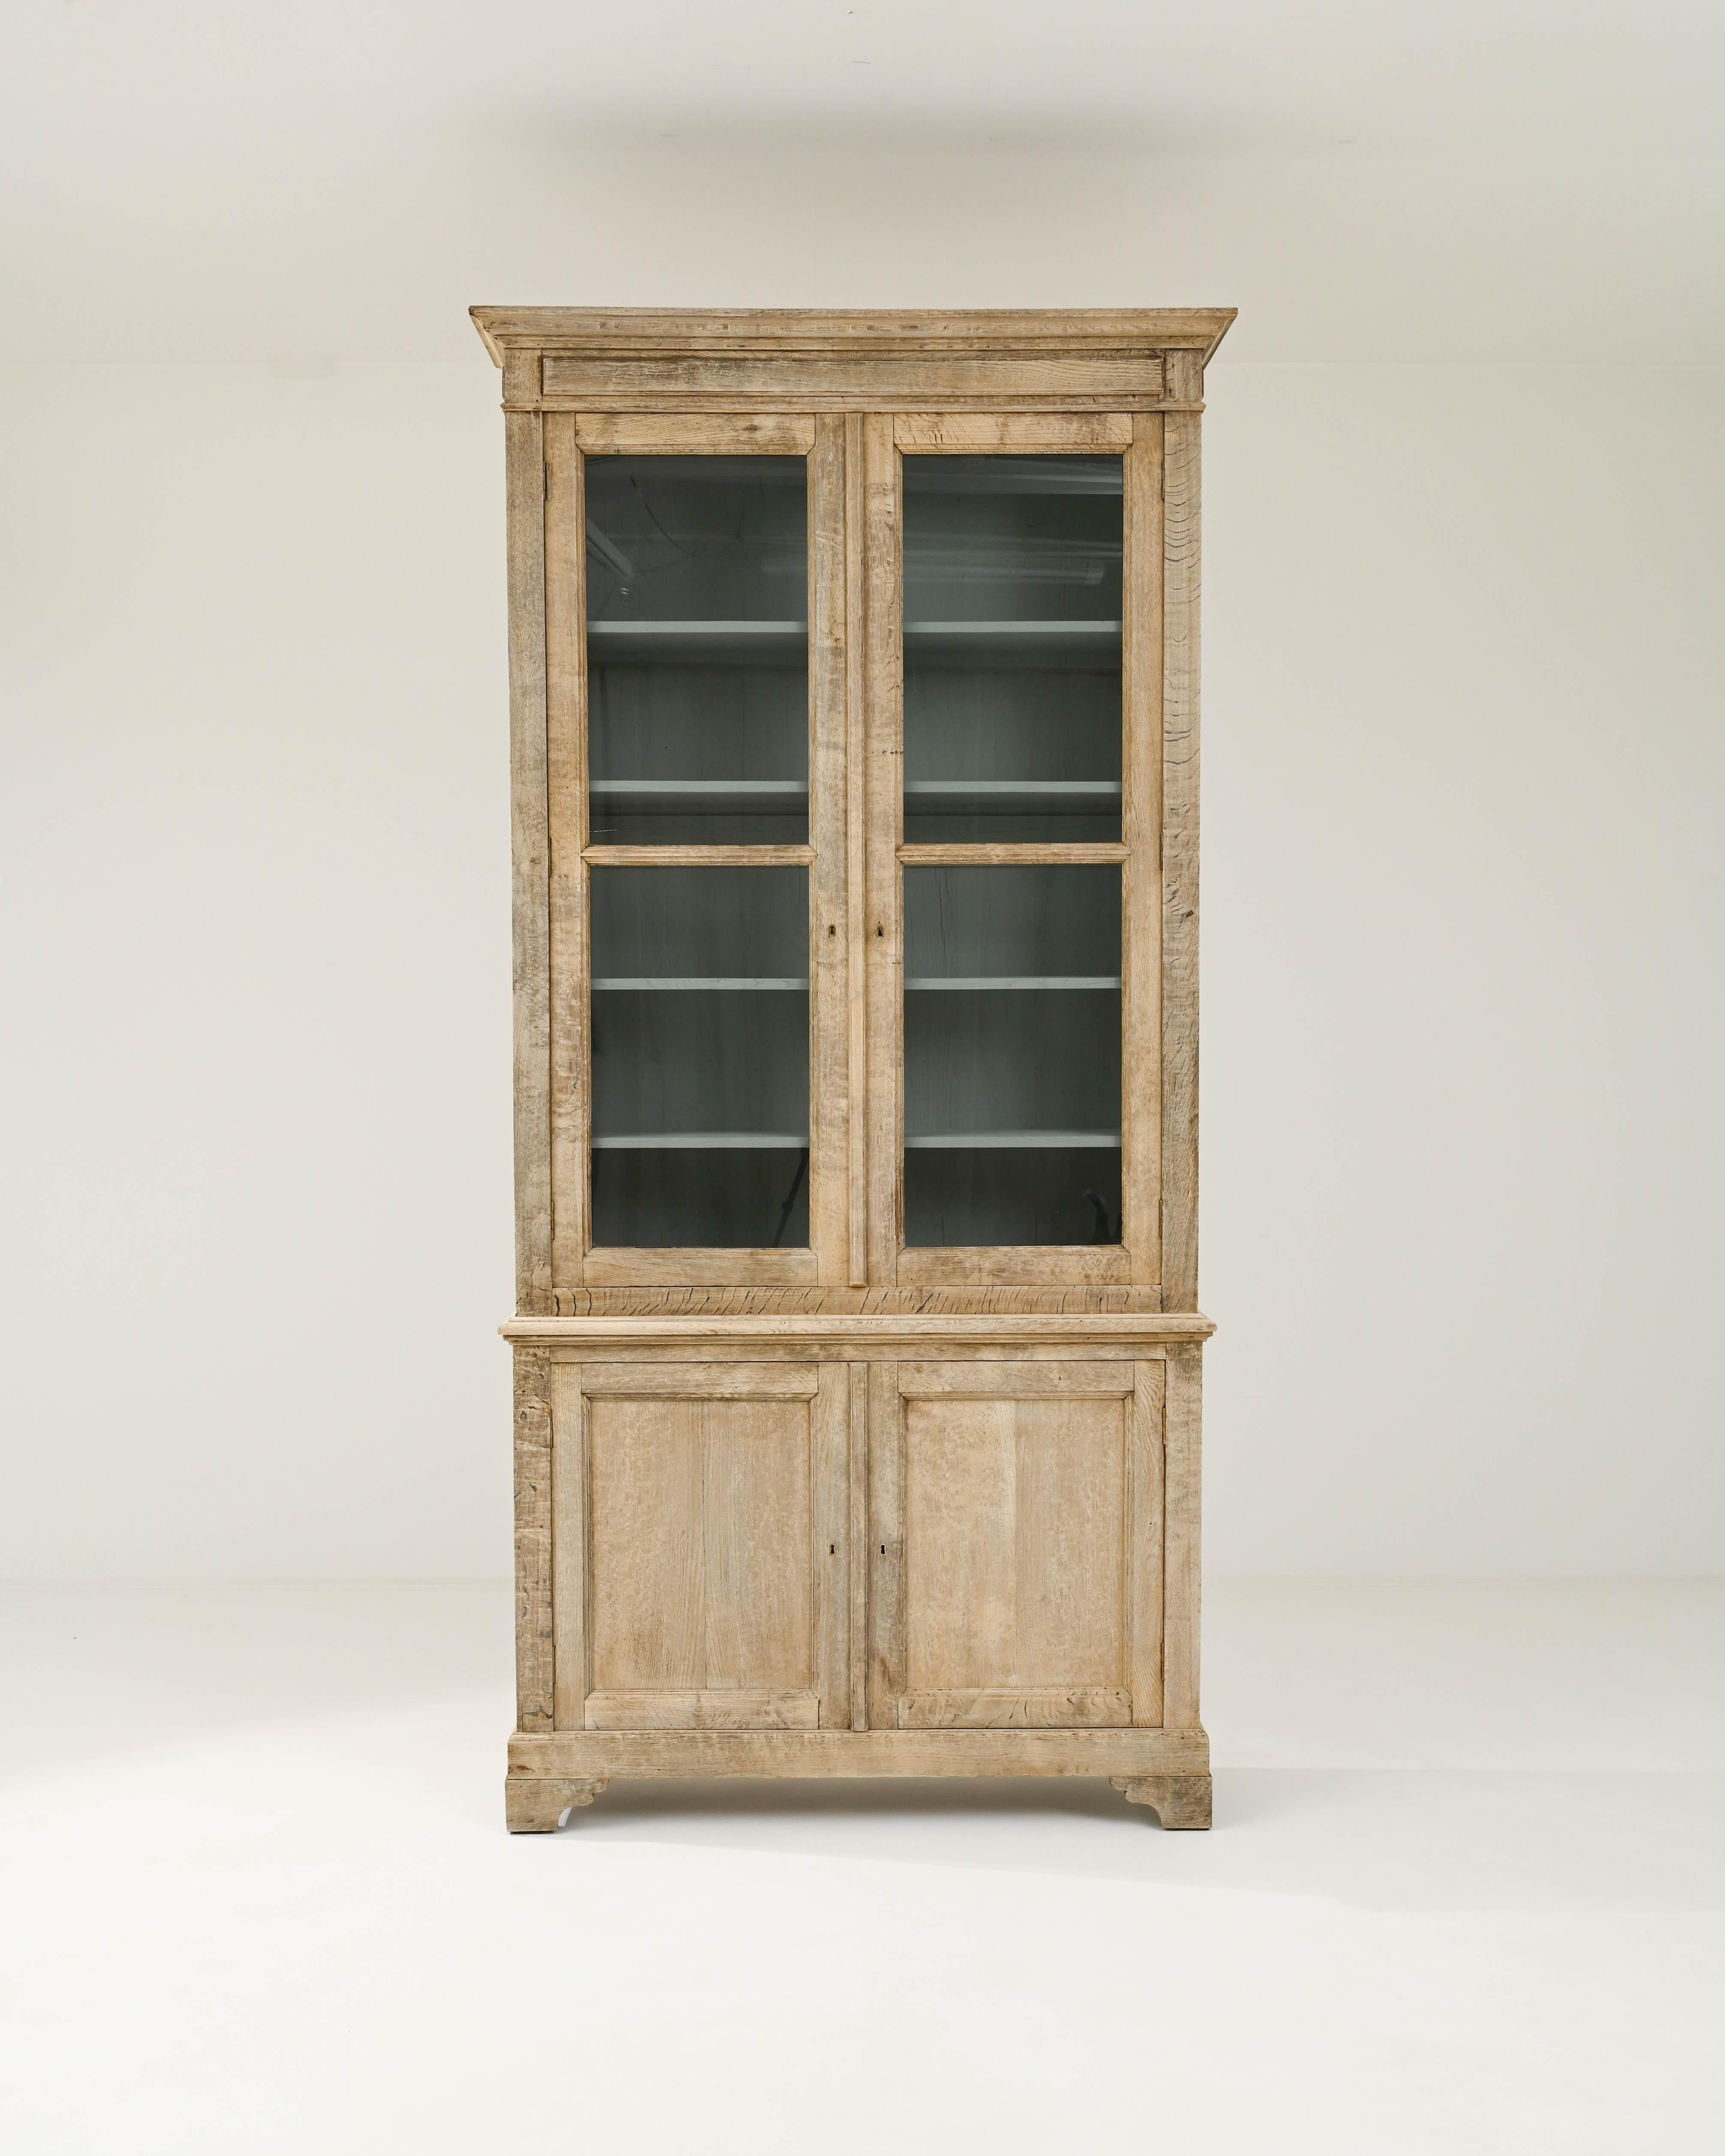 This 19th-century à deux corps vitrine commands attention with its grandeur and understated elegance. The towering stature of this French cabinet is emphasized by a molded cornice with pointed corners. Expertly carved bracket feet and classical